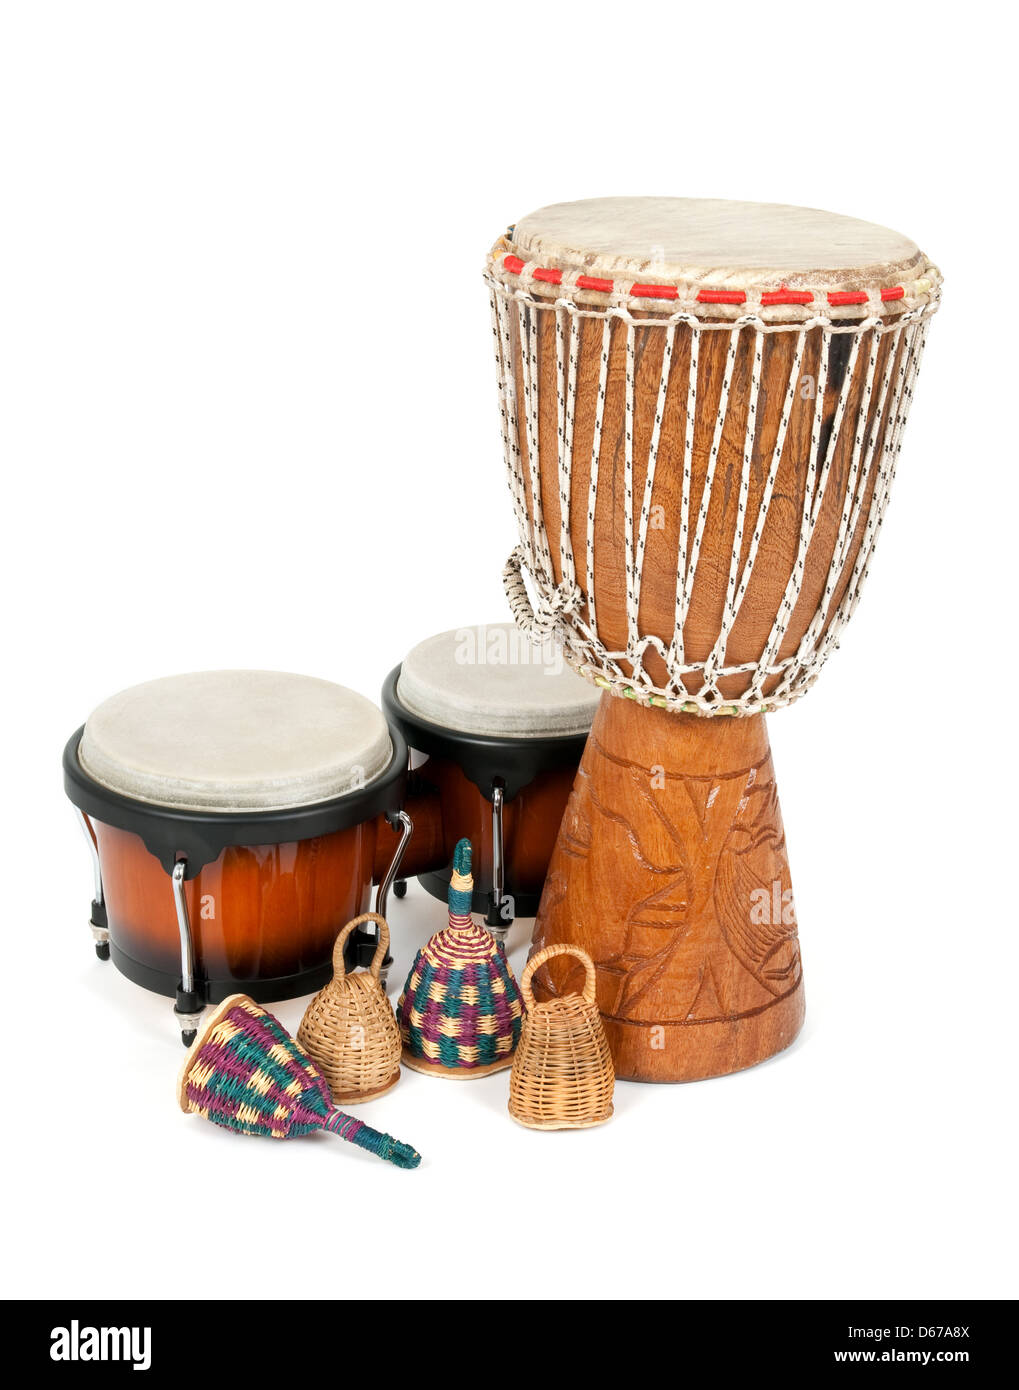 Percussion music instruments: djembe drum, bongos and caxixi shakers. Stock Photo